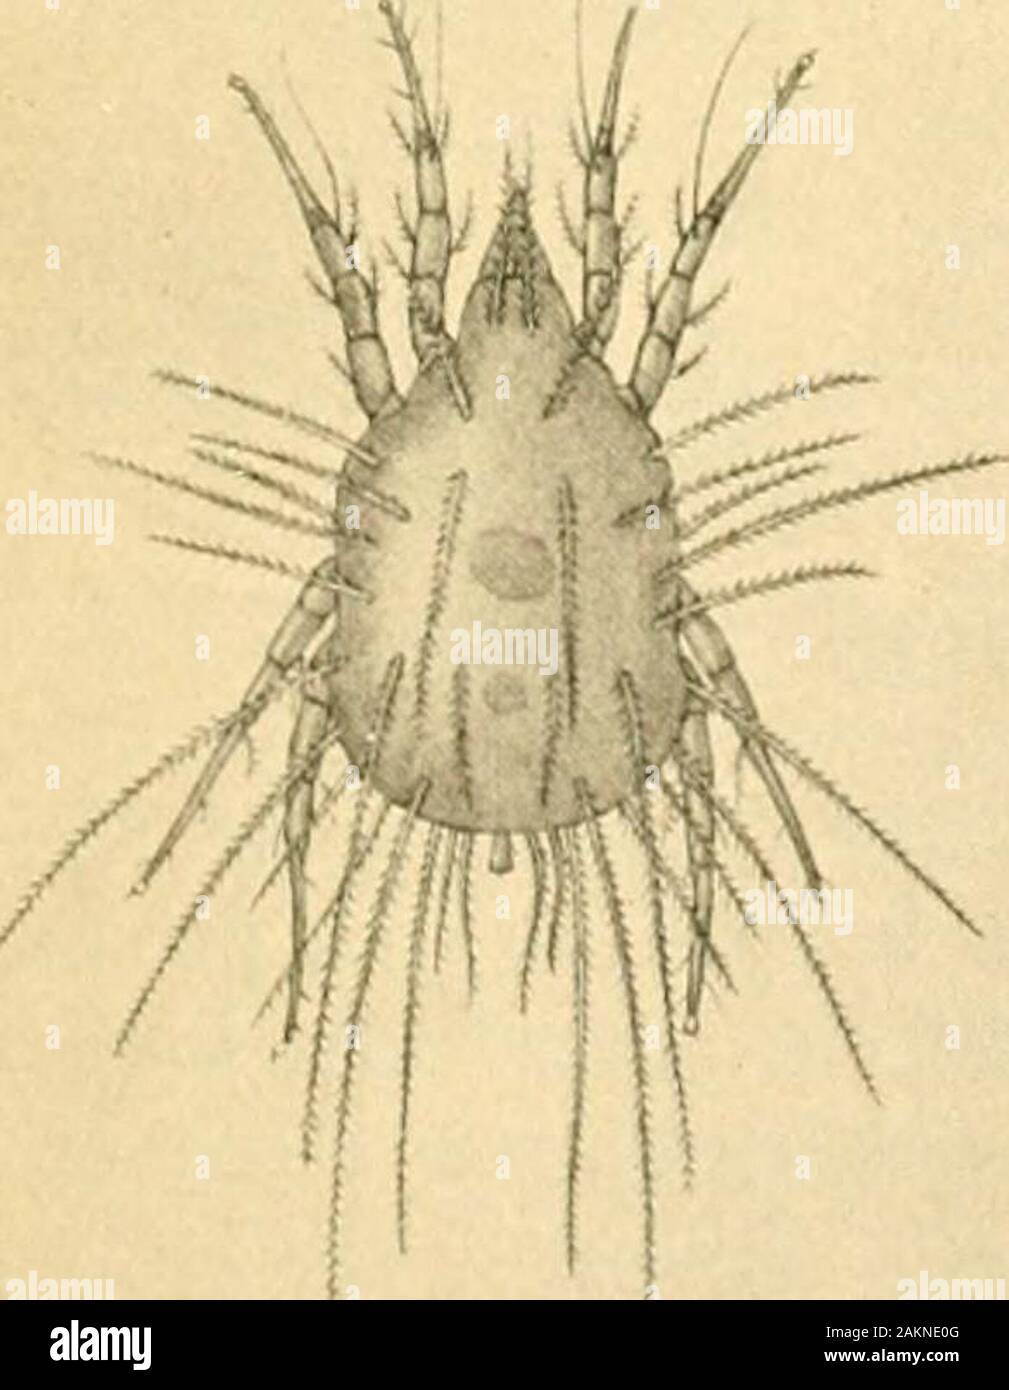 Guide to the Crustacea, Arachnida, Onychophora and Myriopoda exhibited in the Department of Zoology, British Museum (Natural History) .. . Fig. 74. Sarcoj&gt;tcs scabivi, the itch mite, x 100(after Cauestrini). S U B - O K D E i;, V. ASTIGMATA. In these Acari, which are closely alUed to the Prostifpiiafa, there is no trace of a respiratory system. Many of them are parasitic, otiiers are free-living and feed on animal and vegetable refuse.It is to this sub-order that themite (Sarcoptcs scahici) whichis the cause of itch belongs.The cheese mite (Tjjroijhjphussiro) is perhaps the most fami-liar o Stock Photo